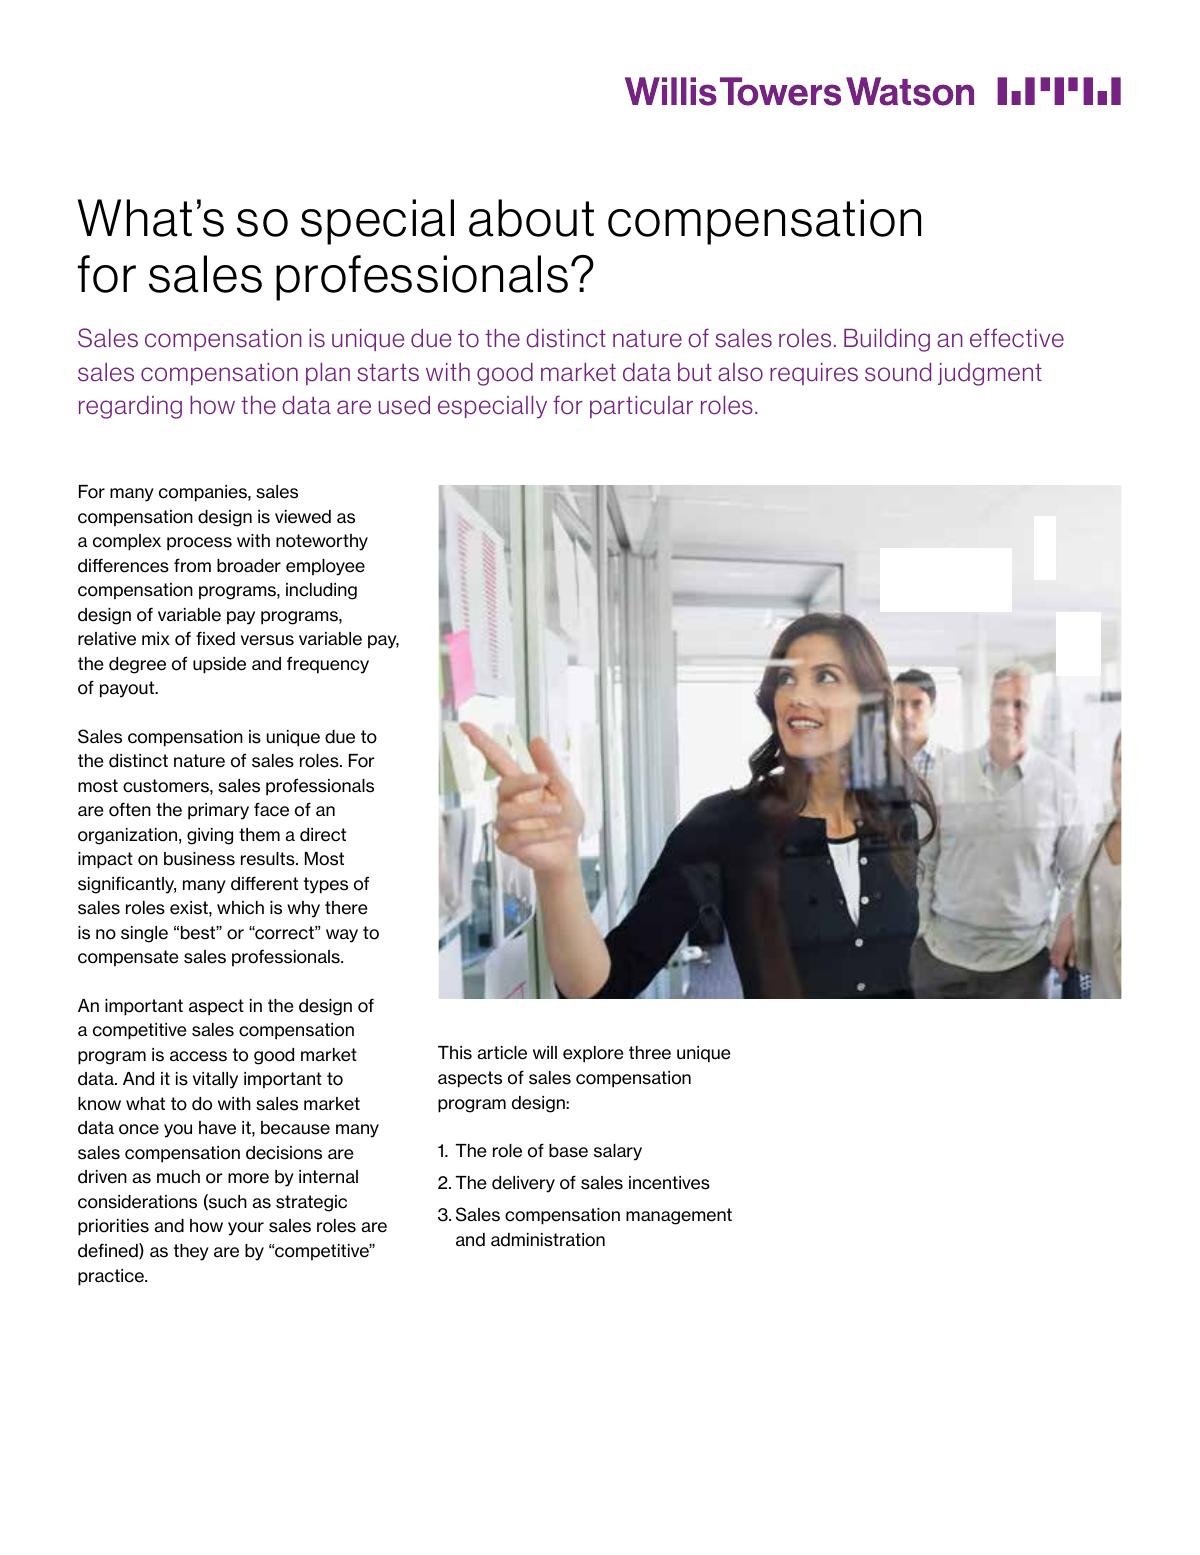 What’s so special about compensation for sales professionals?